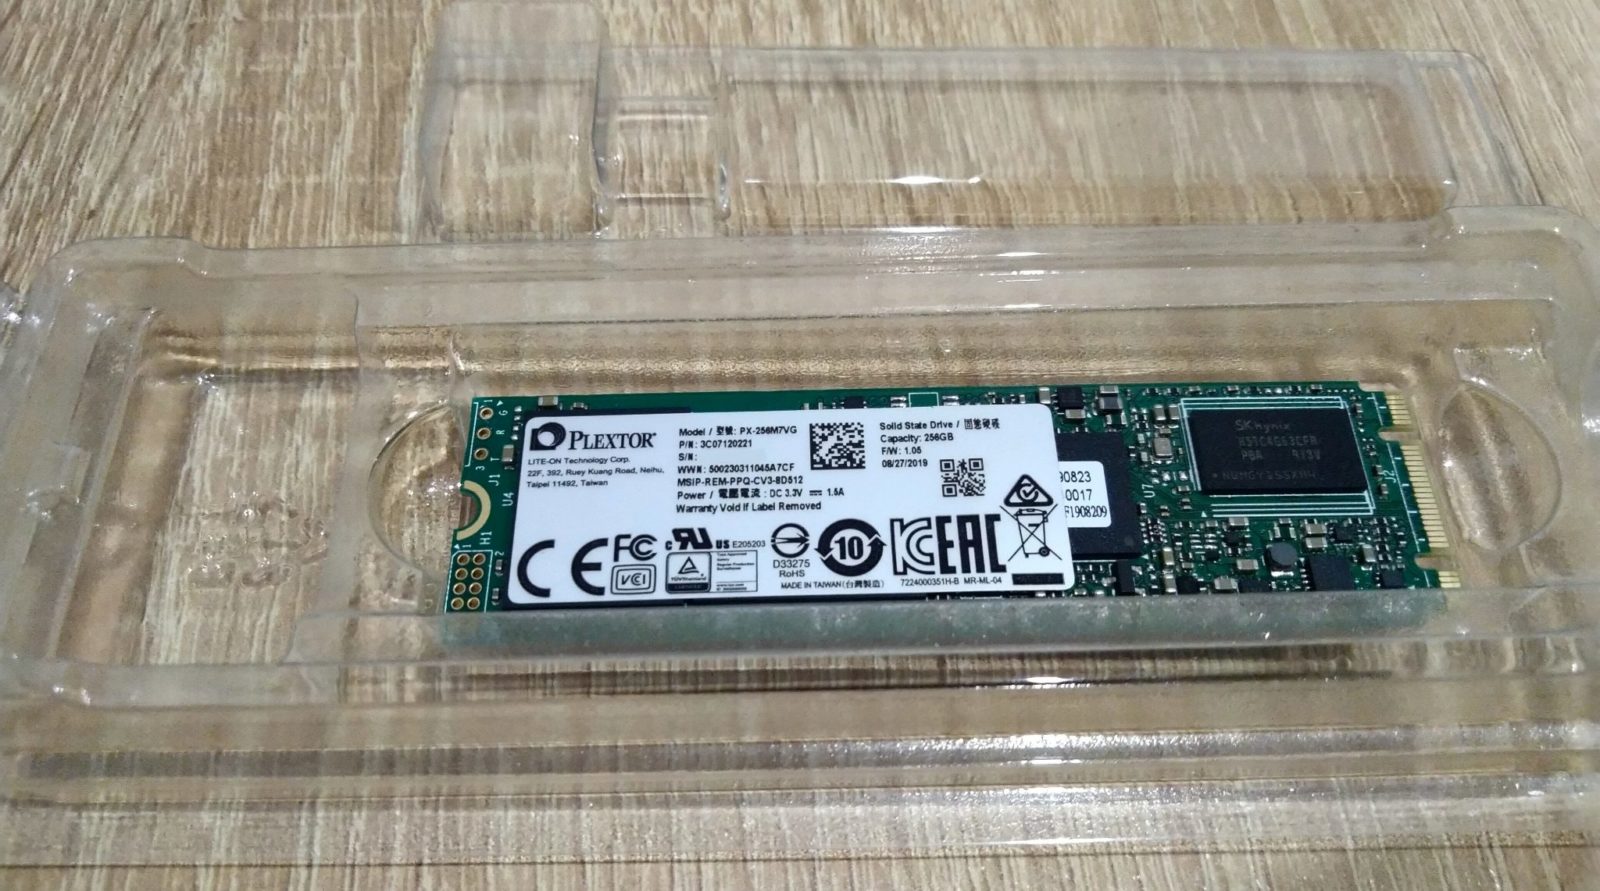 Uncle or Mister Vaccinate Frog SSD Plextor M.2 M7V 256GB SATA3 TLC PX-256M7VG Review – Tiny Reviews